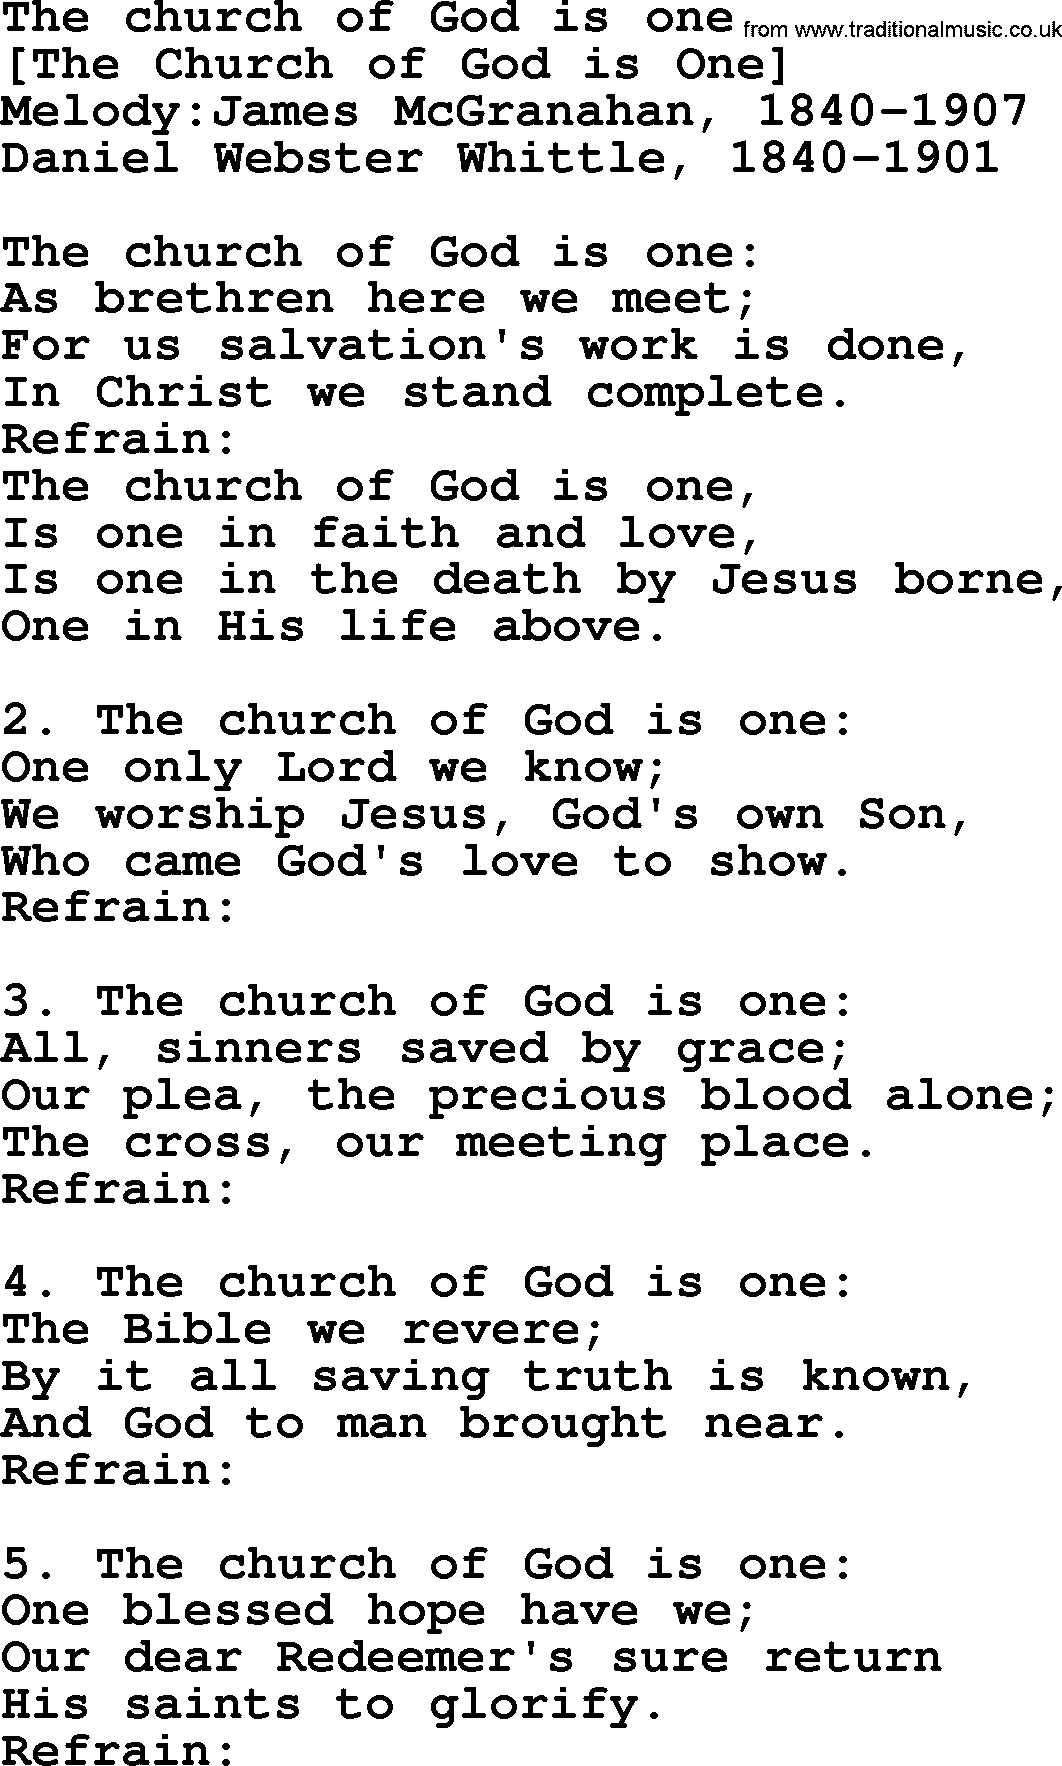 Old American Song: The Church Of God Is One, lyrics